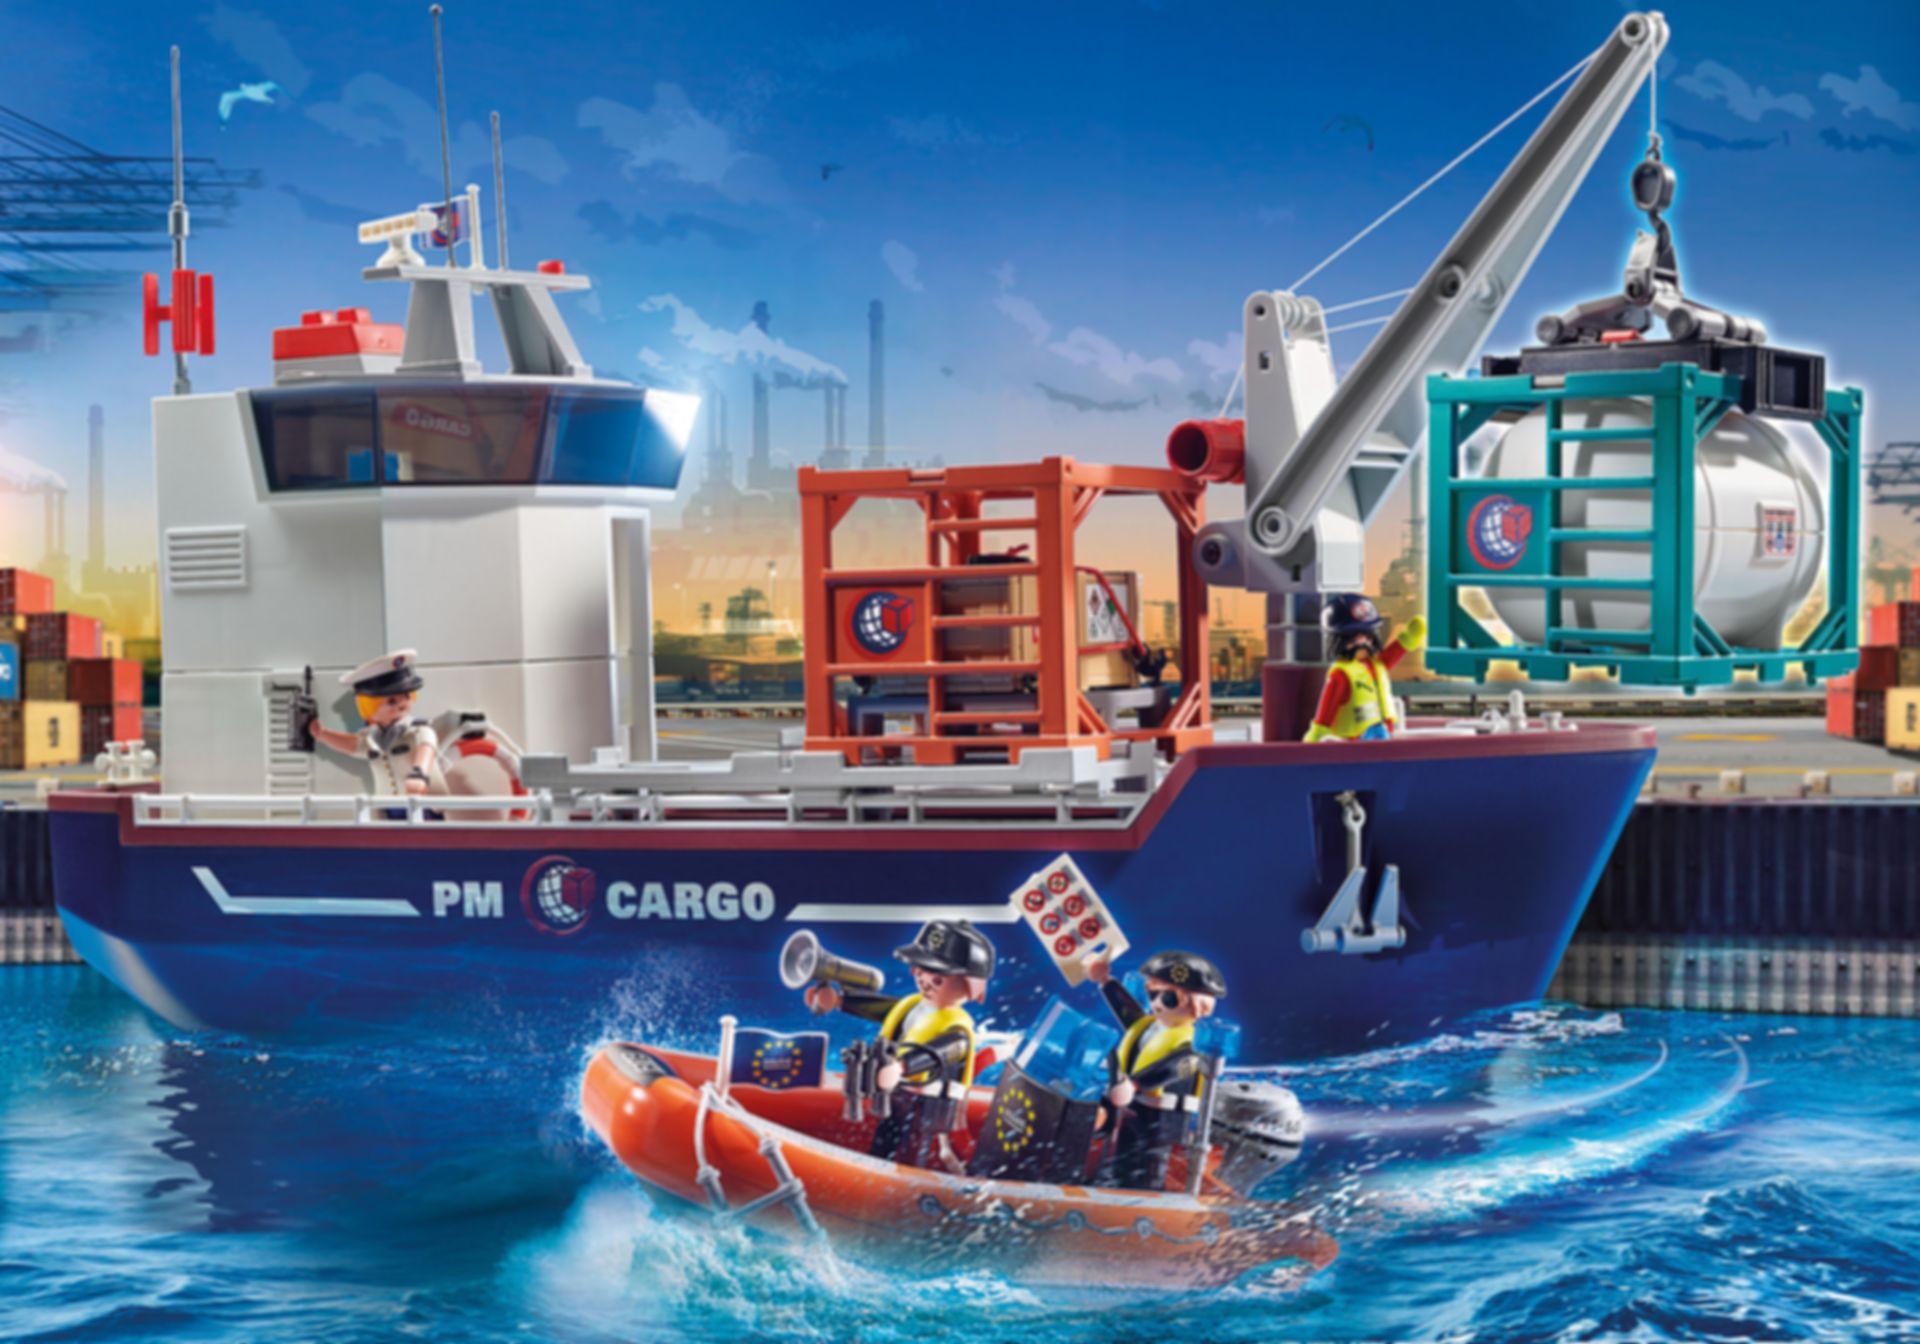 Playmobil® City Action Cargo Ship with Boat